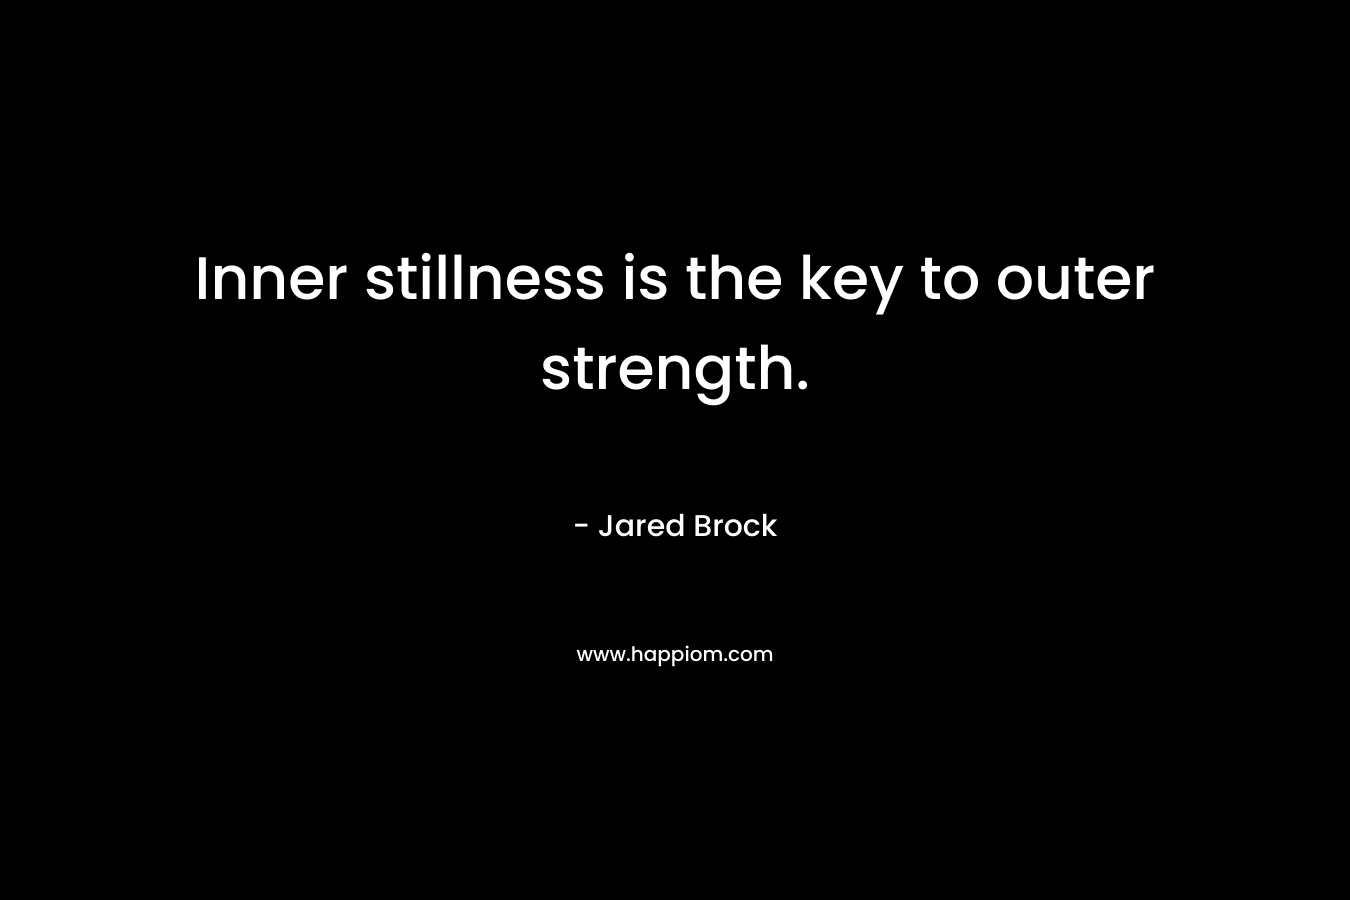 Inner stillness is the key to outer strength.